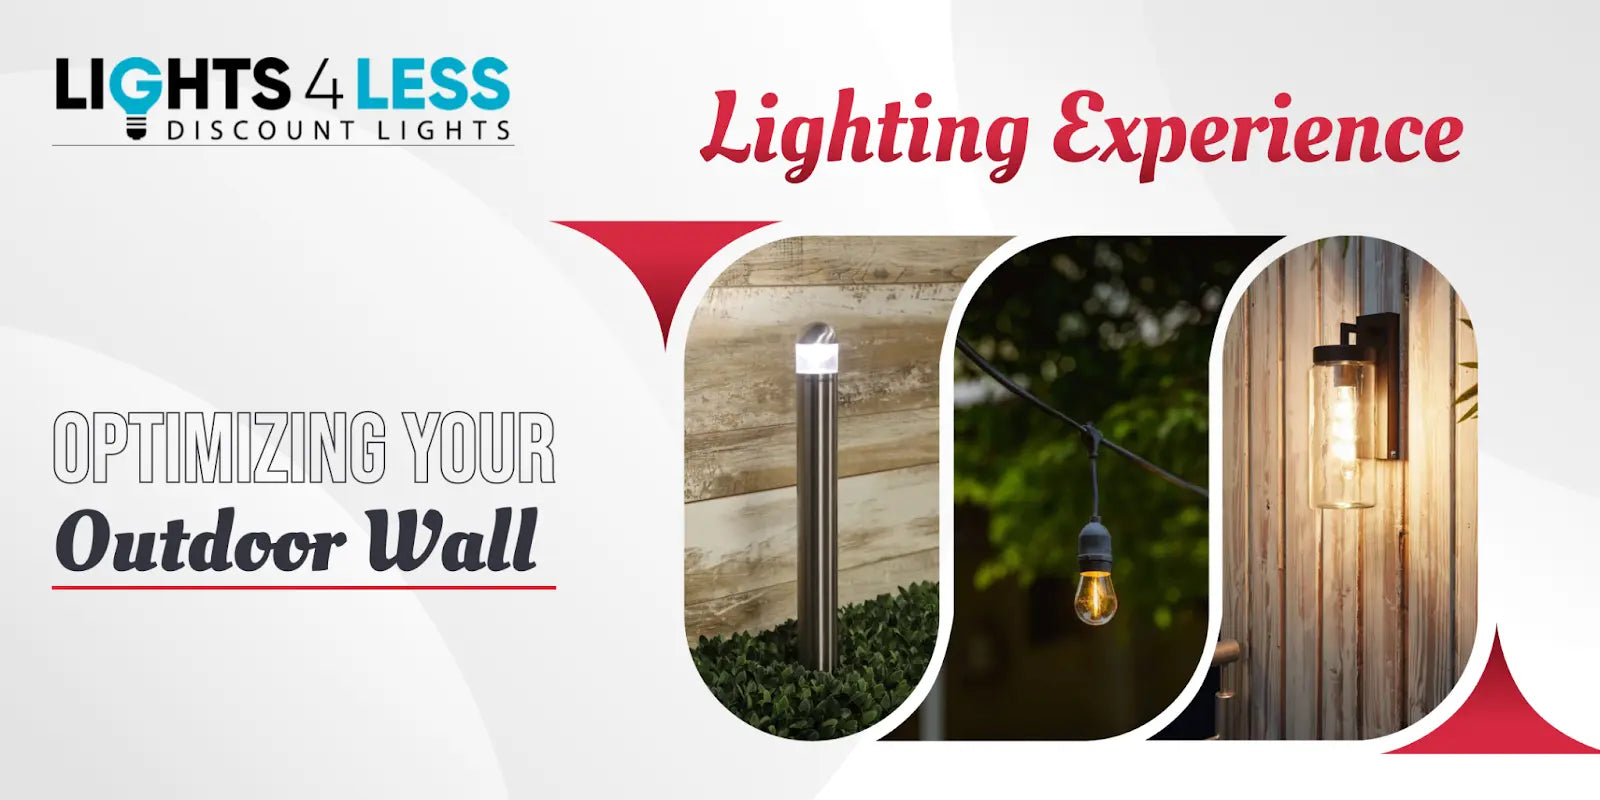 How to Make the Most of Your Outdoor Wall Lights